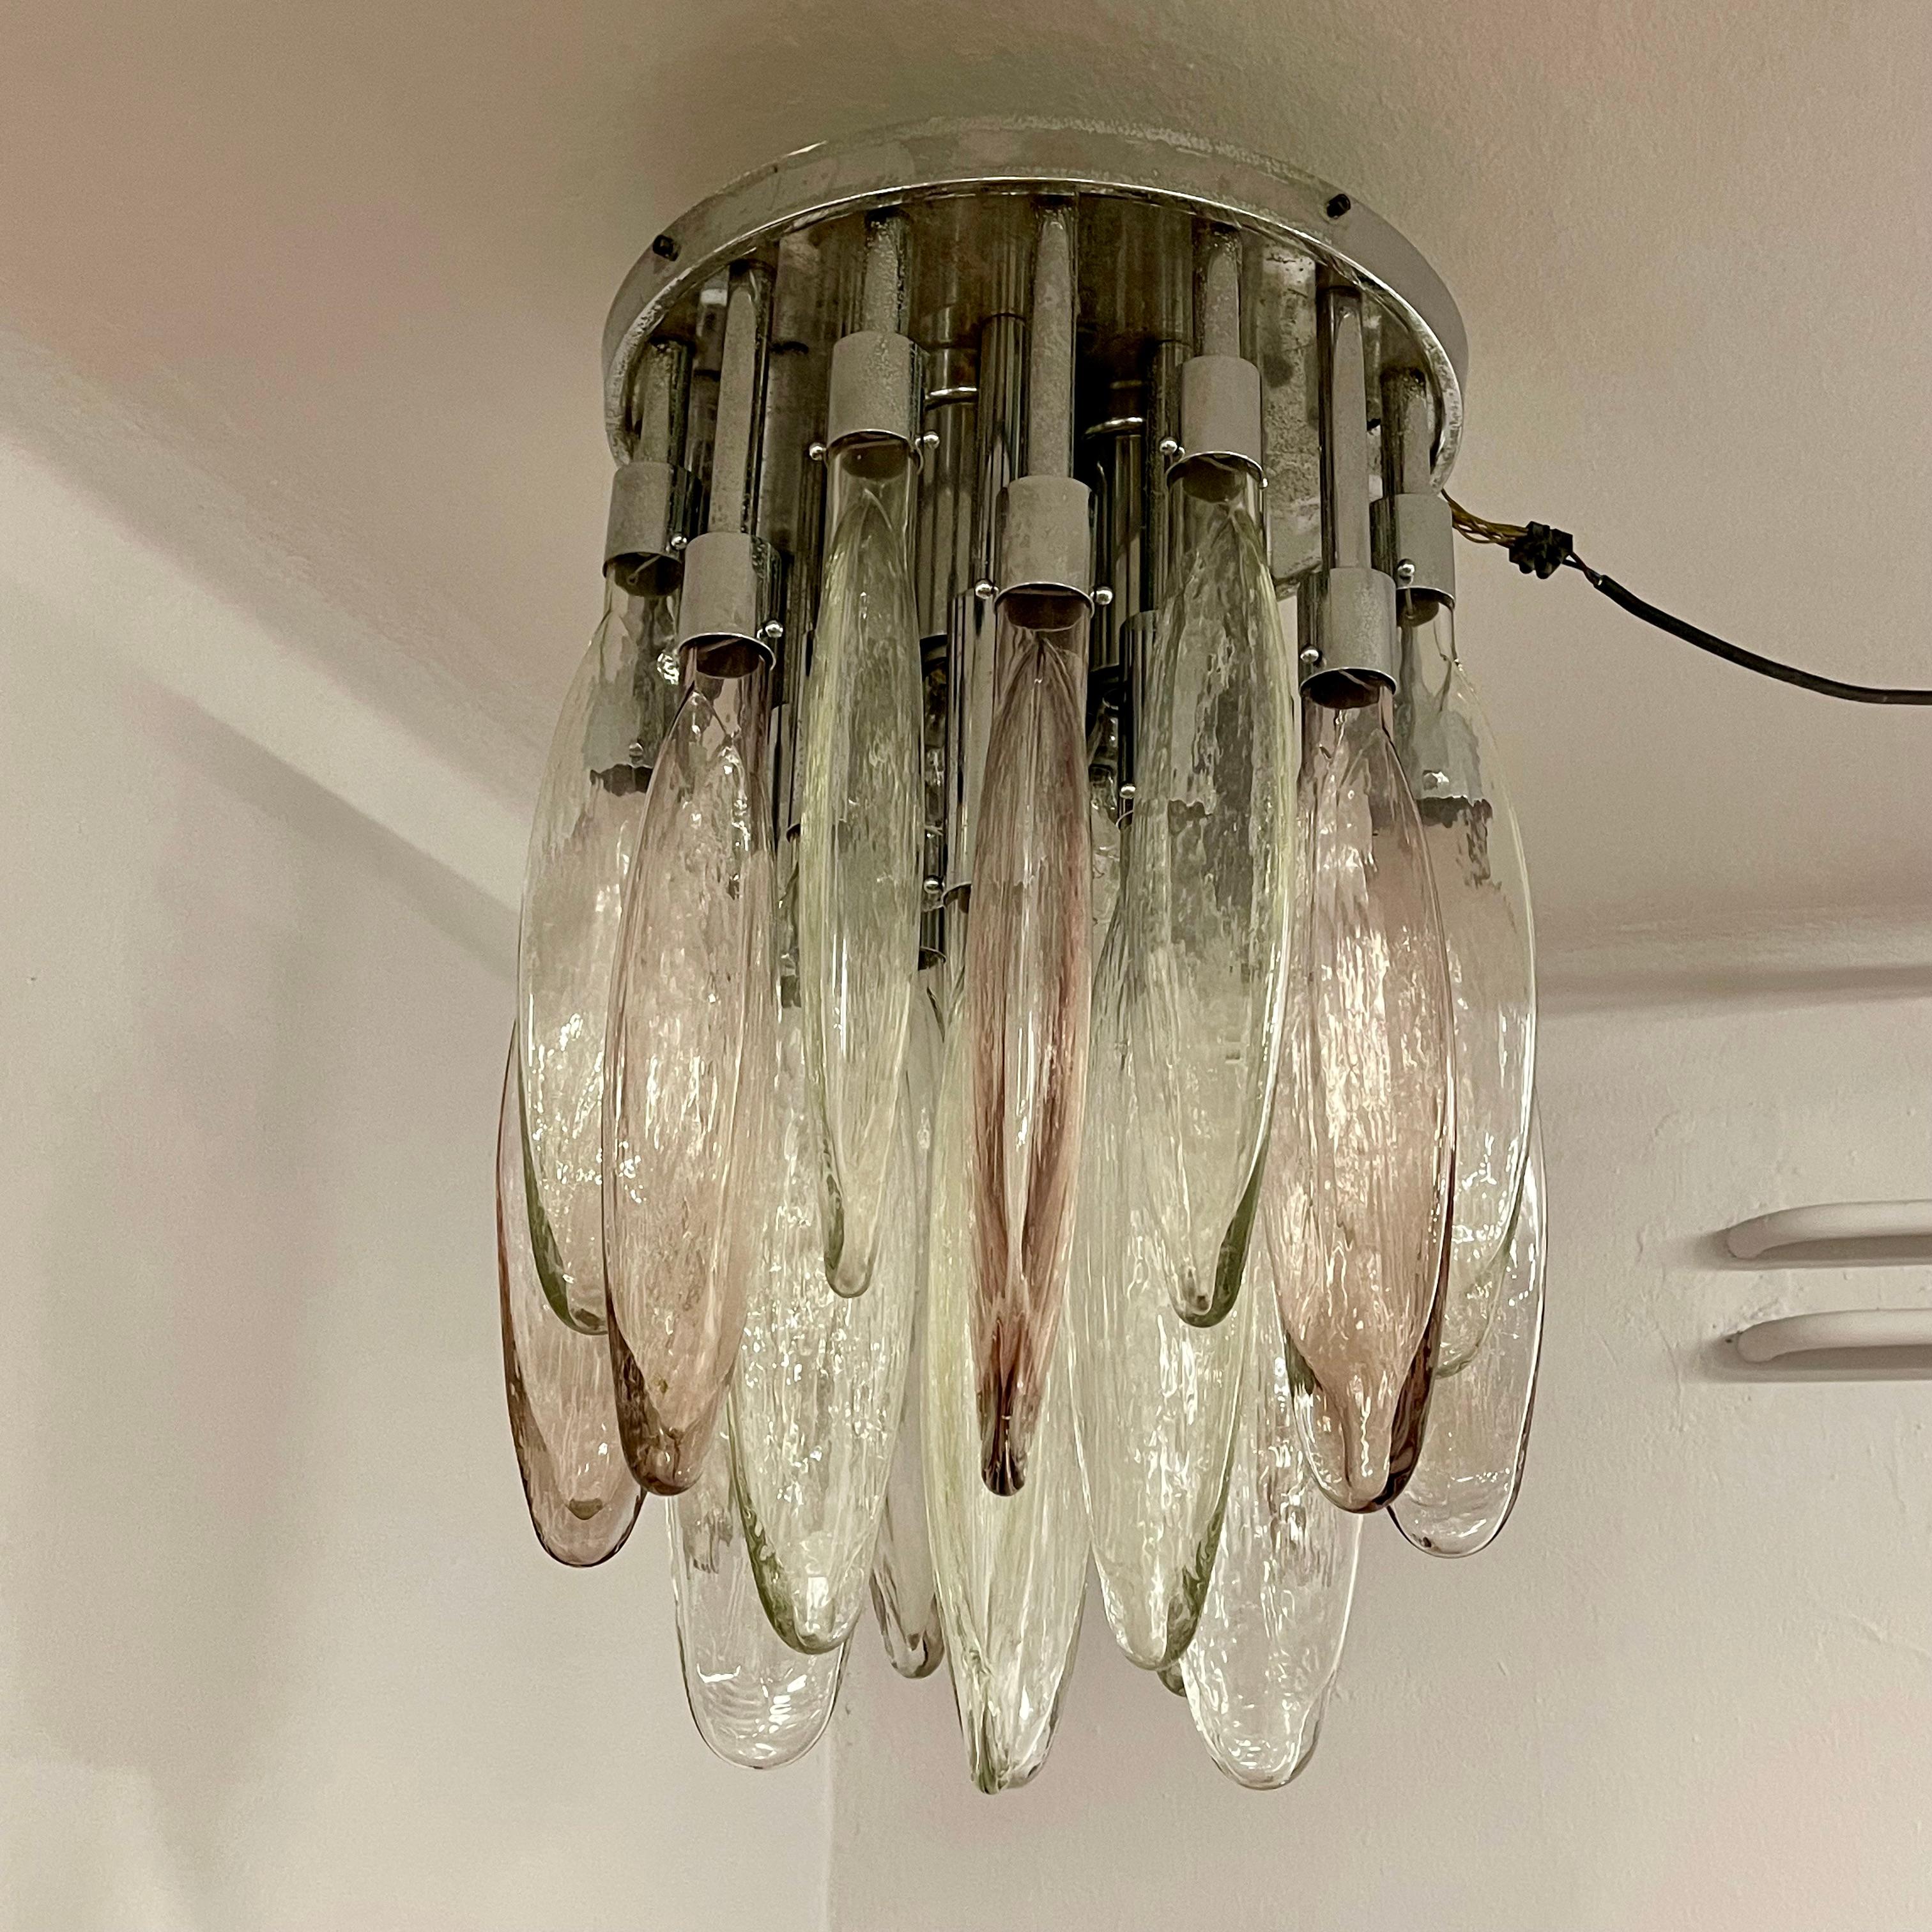 Exceptional chandelier with 25 Murano blown glass elements in two colours, transparent and lilac. Chromed structure (with slight oxidation). The design and quality of the glass make it easy to attribute it to the production of Vetreria Mazzega, even